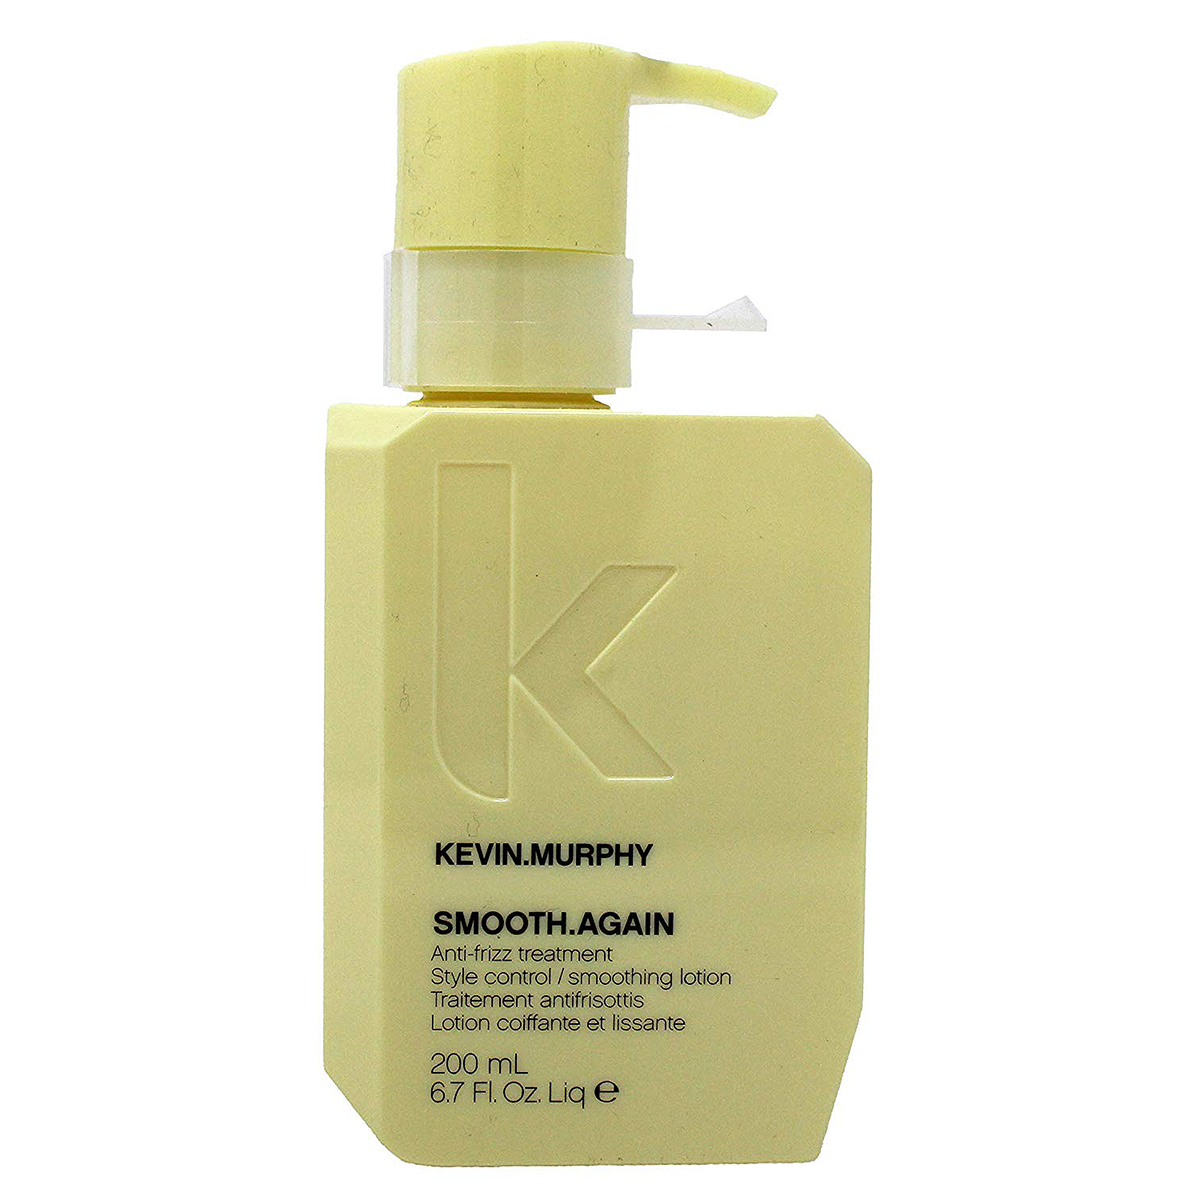 Kevin Murphy SMOOTH.AGAIN Anti-Frizz Treatment